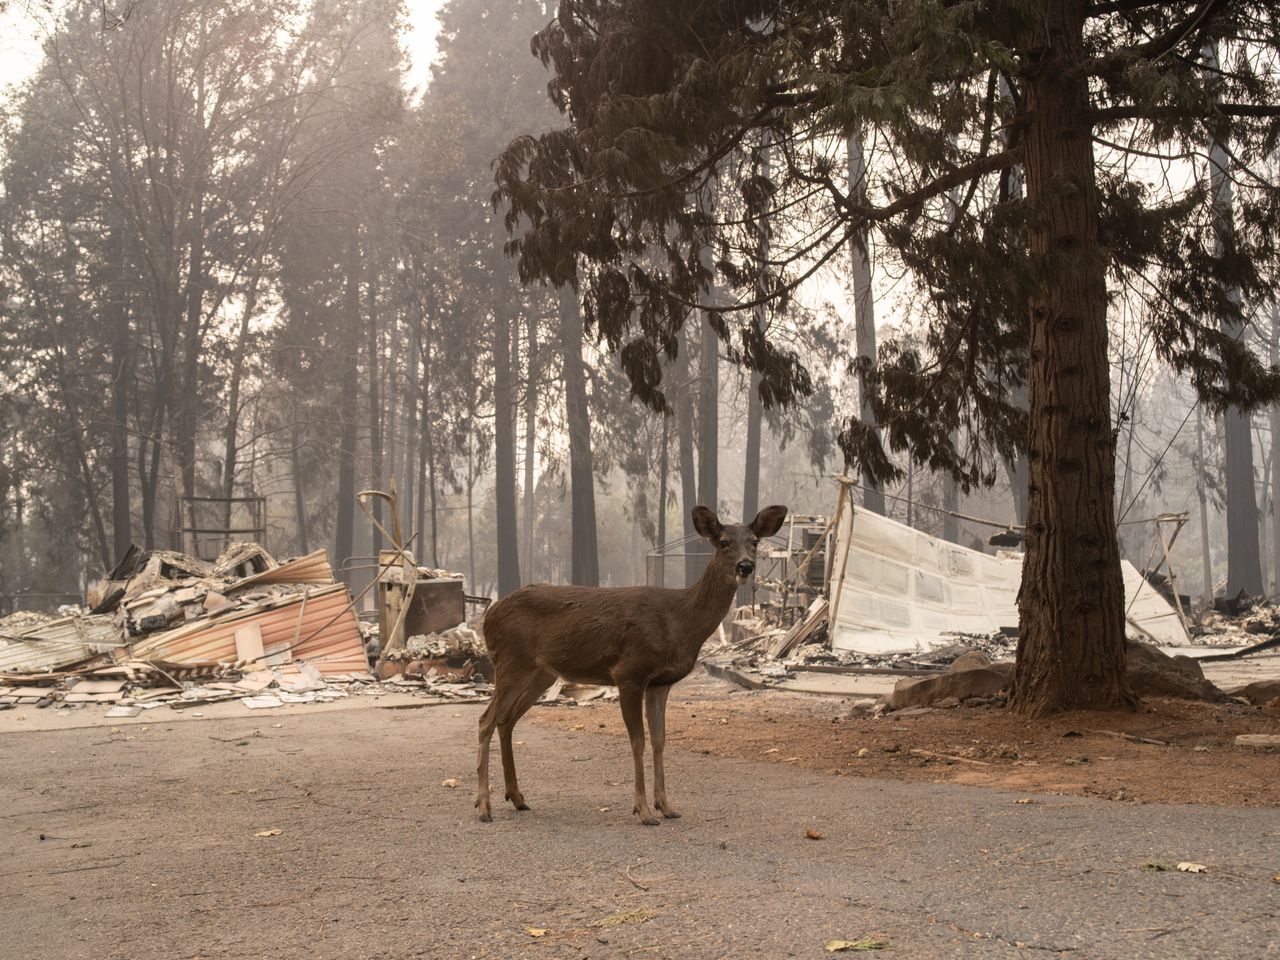 The entire city of Paradise is still blocked off to residents. Meanwhile, much of Butte County's wildlife is trying to survive as well.